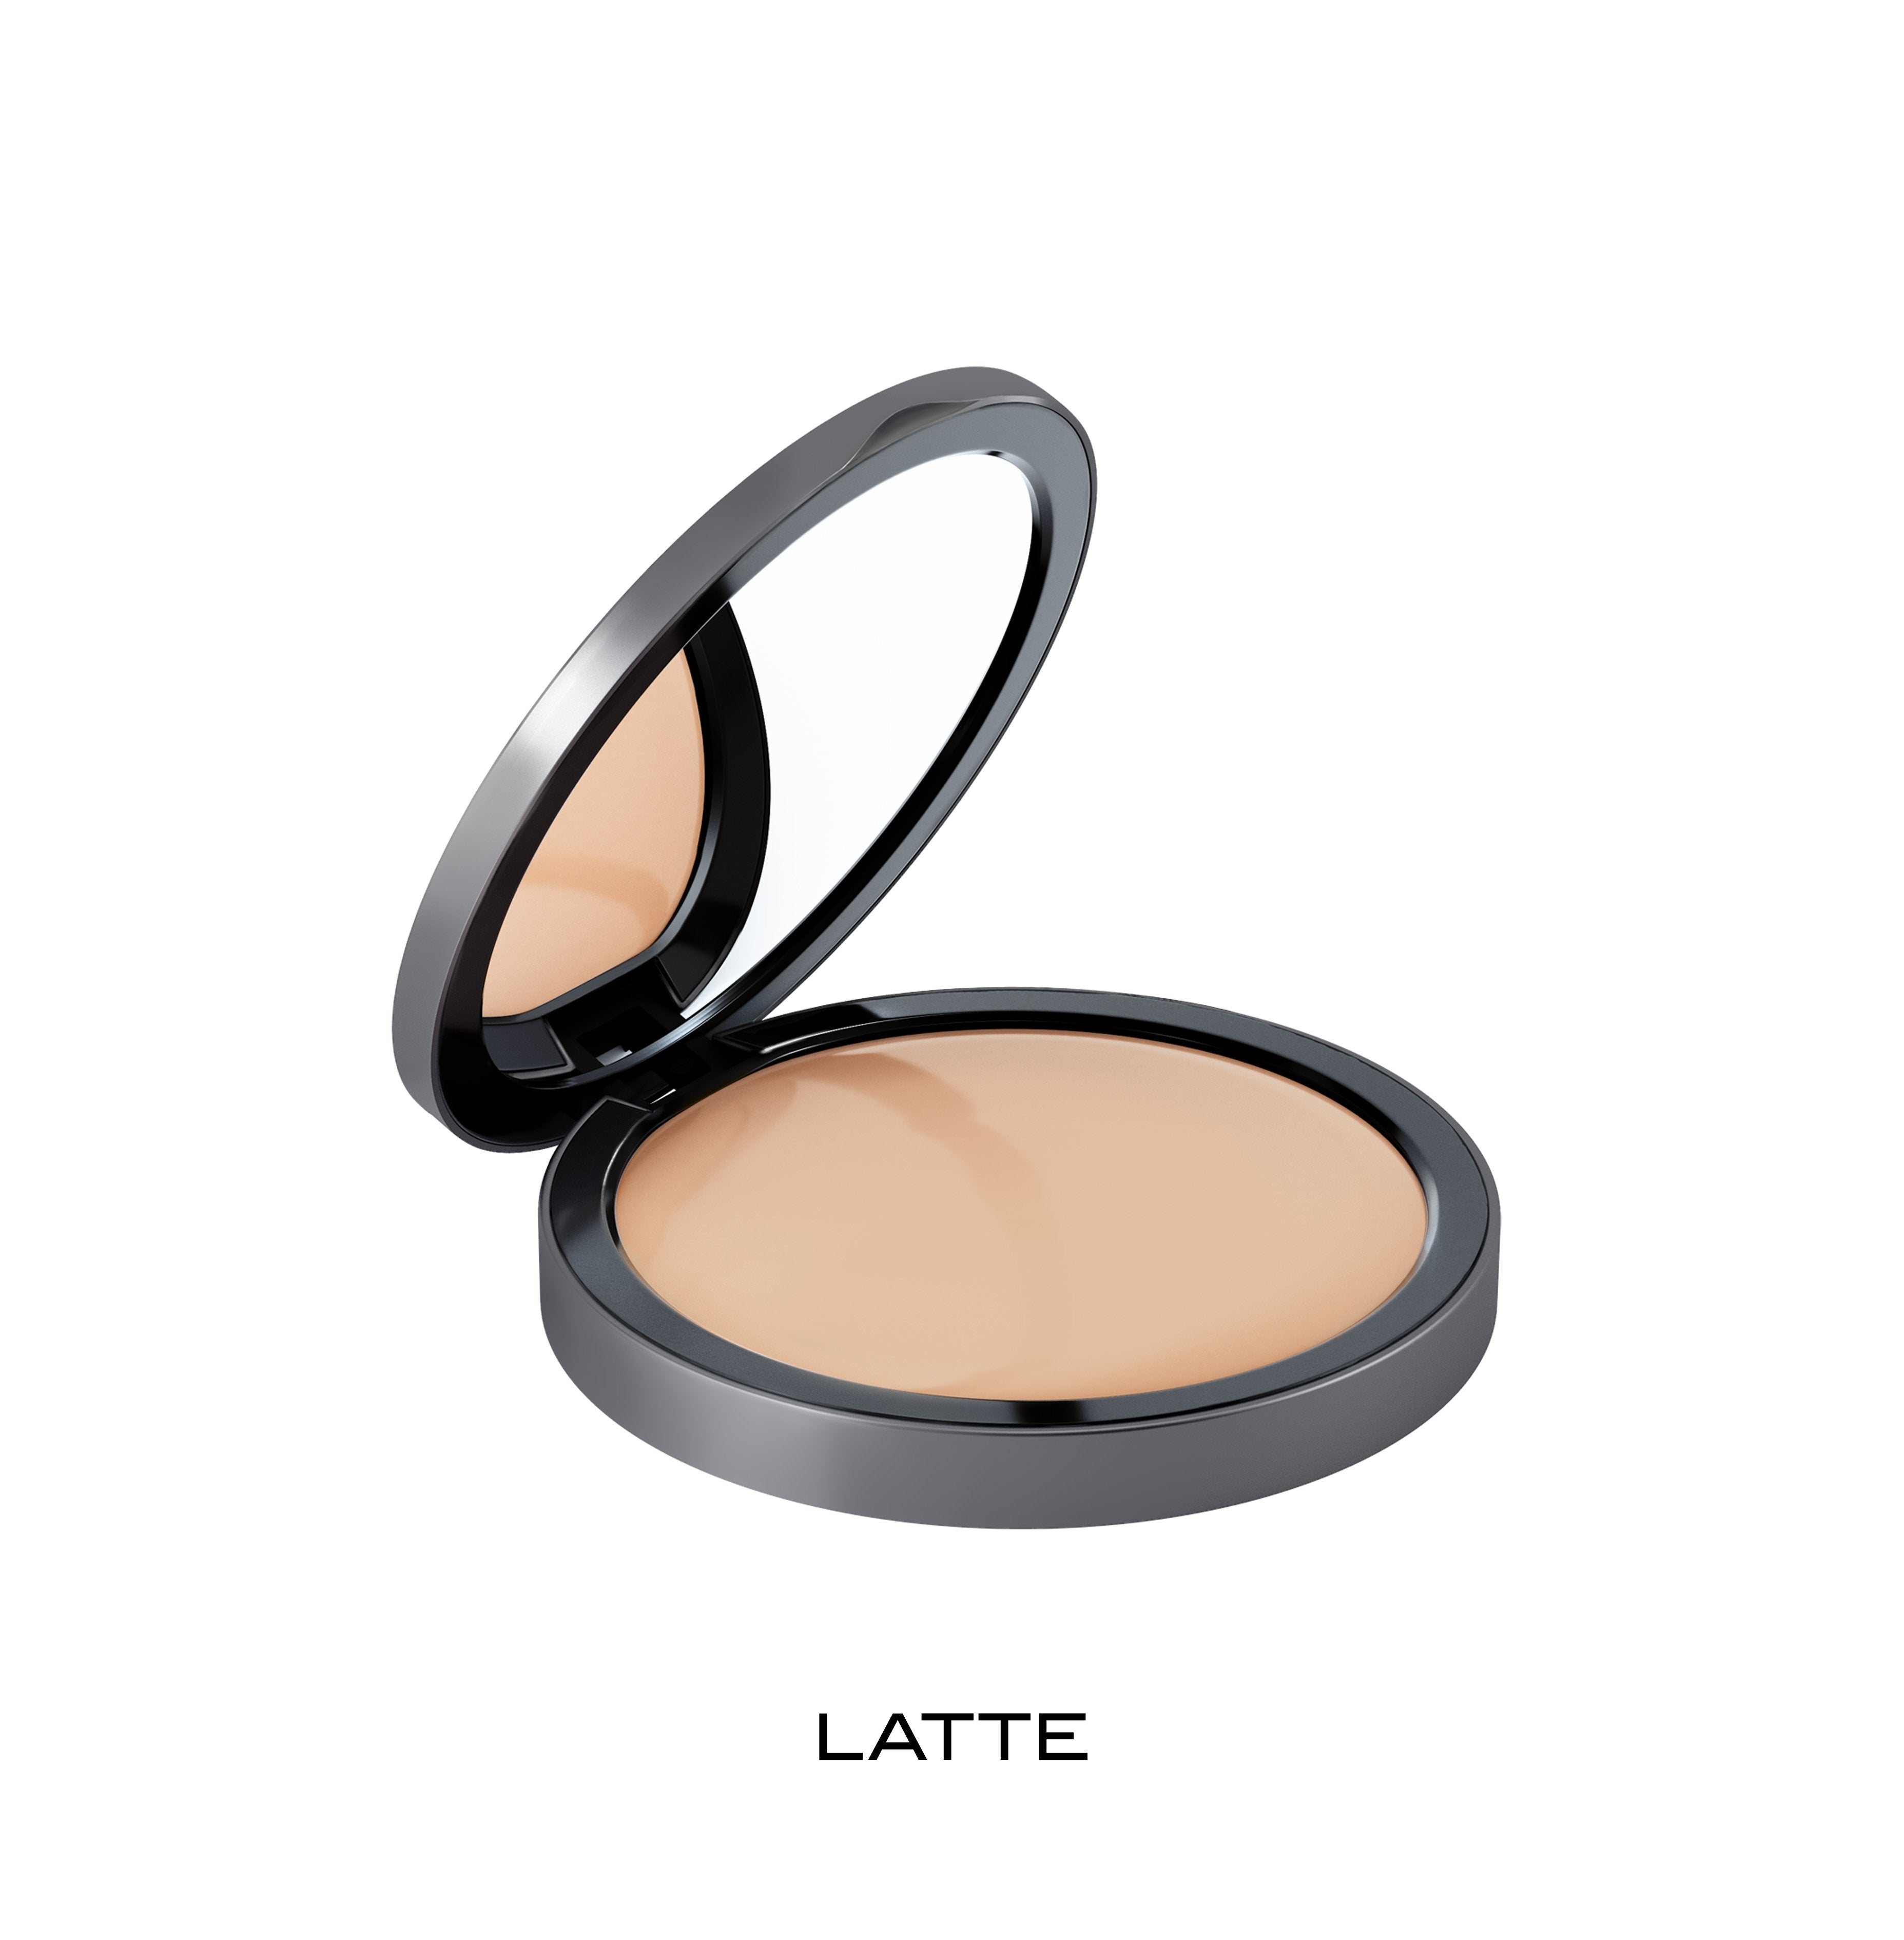 Synergie Skin Mineral Whip Foundation in Latte | skintoheart